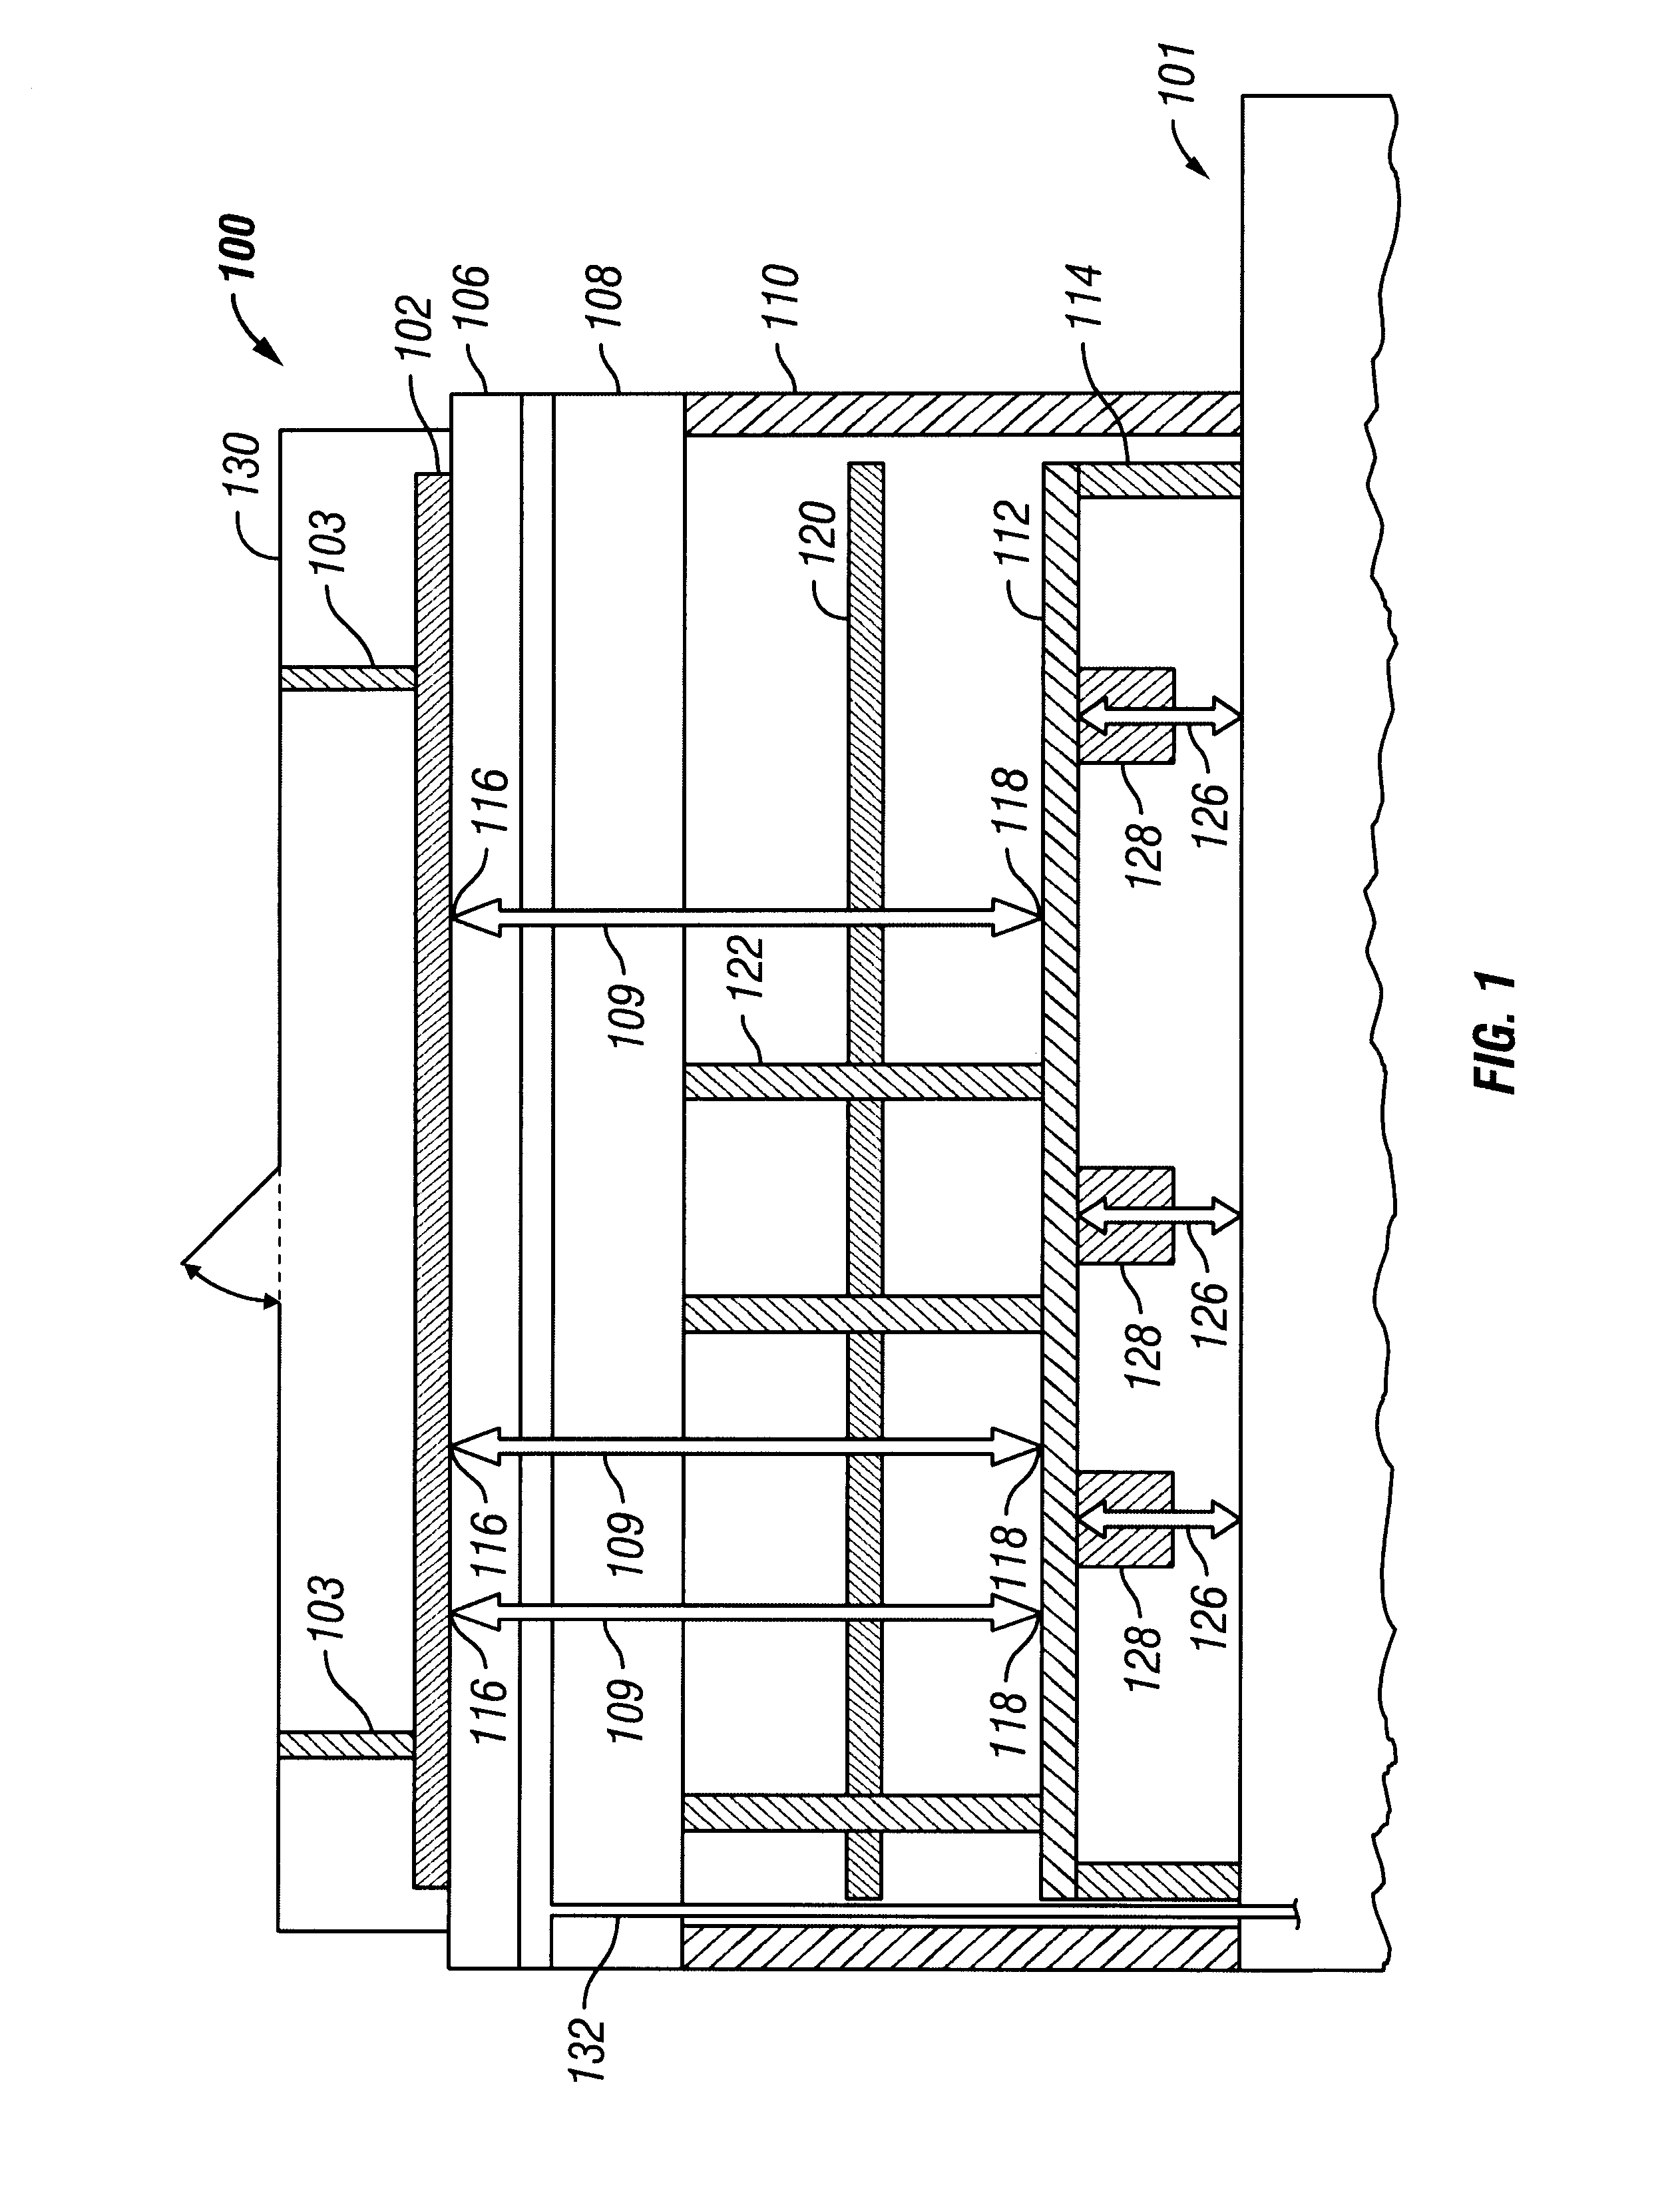 Method and apparatus for the management of forces in a wireless fixture